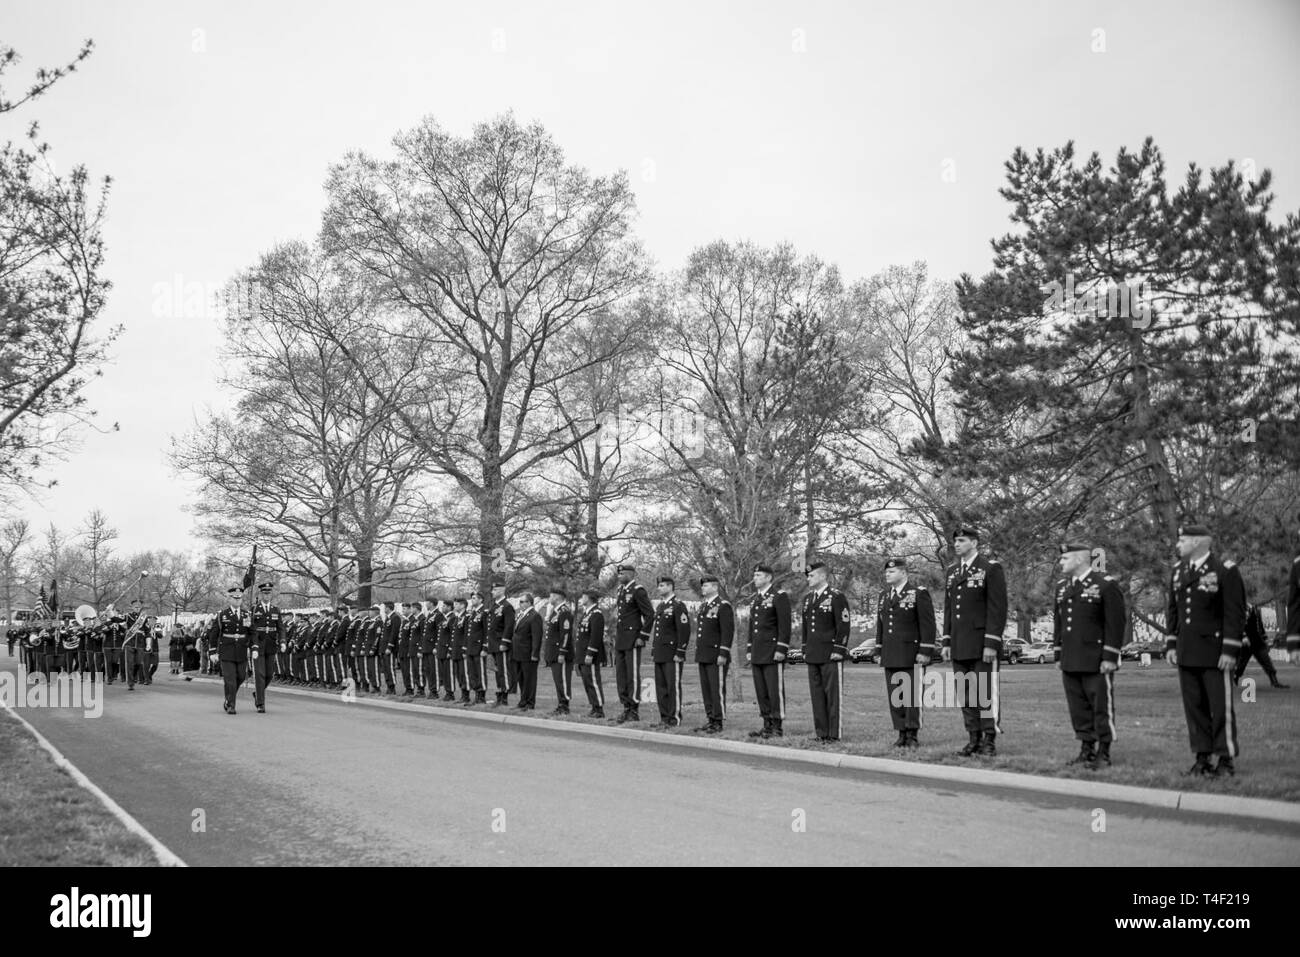 Soldiers from the 3d U.S. Infantry Regiment (The Old Guard); The U.S. Army Band, “Pershing’s Own”, and The 3d U.S. Infantry Regiment (The Old Guard) Caisson Platoon, conduct military funeral honors with funeral escort for U.S. Army Chief Warrant Officer 2 Jonathan Farmer in Section 60 of Arlington National Cemetery, Arlington, Virginia, April 9, 2019.    Farmer joined the Army on March 30, 2005 and graduated in 2007 from One Station Unit Training at Fort Benning, Georgia to become a Special Forces engineer sergeant. He earned his commission as a Special Forces warrant officer in 2016 and after Stock Photo